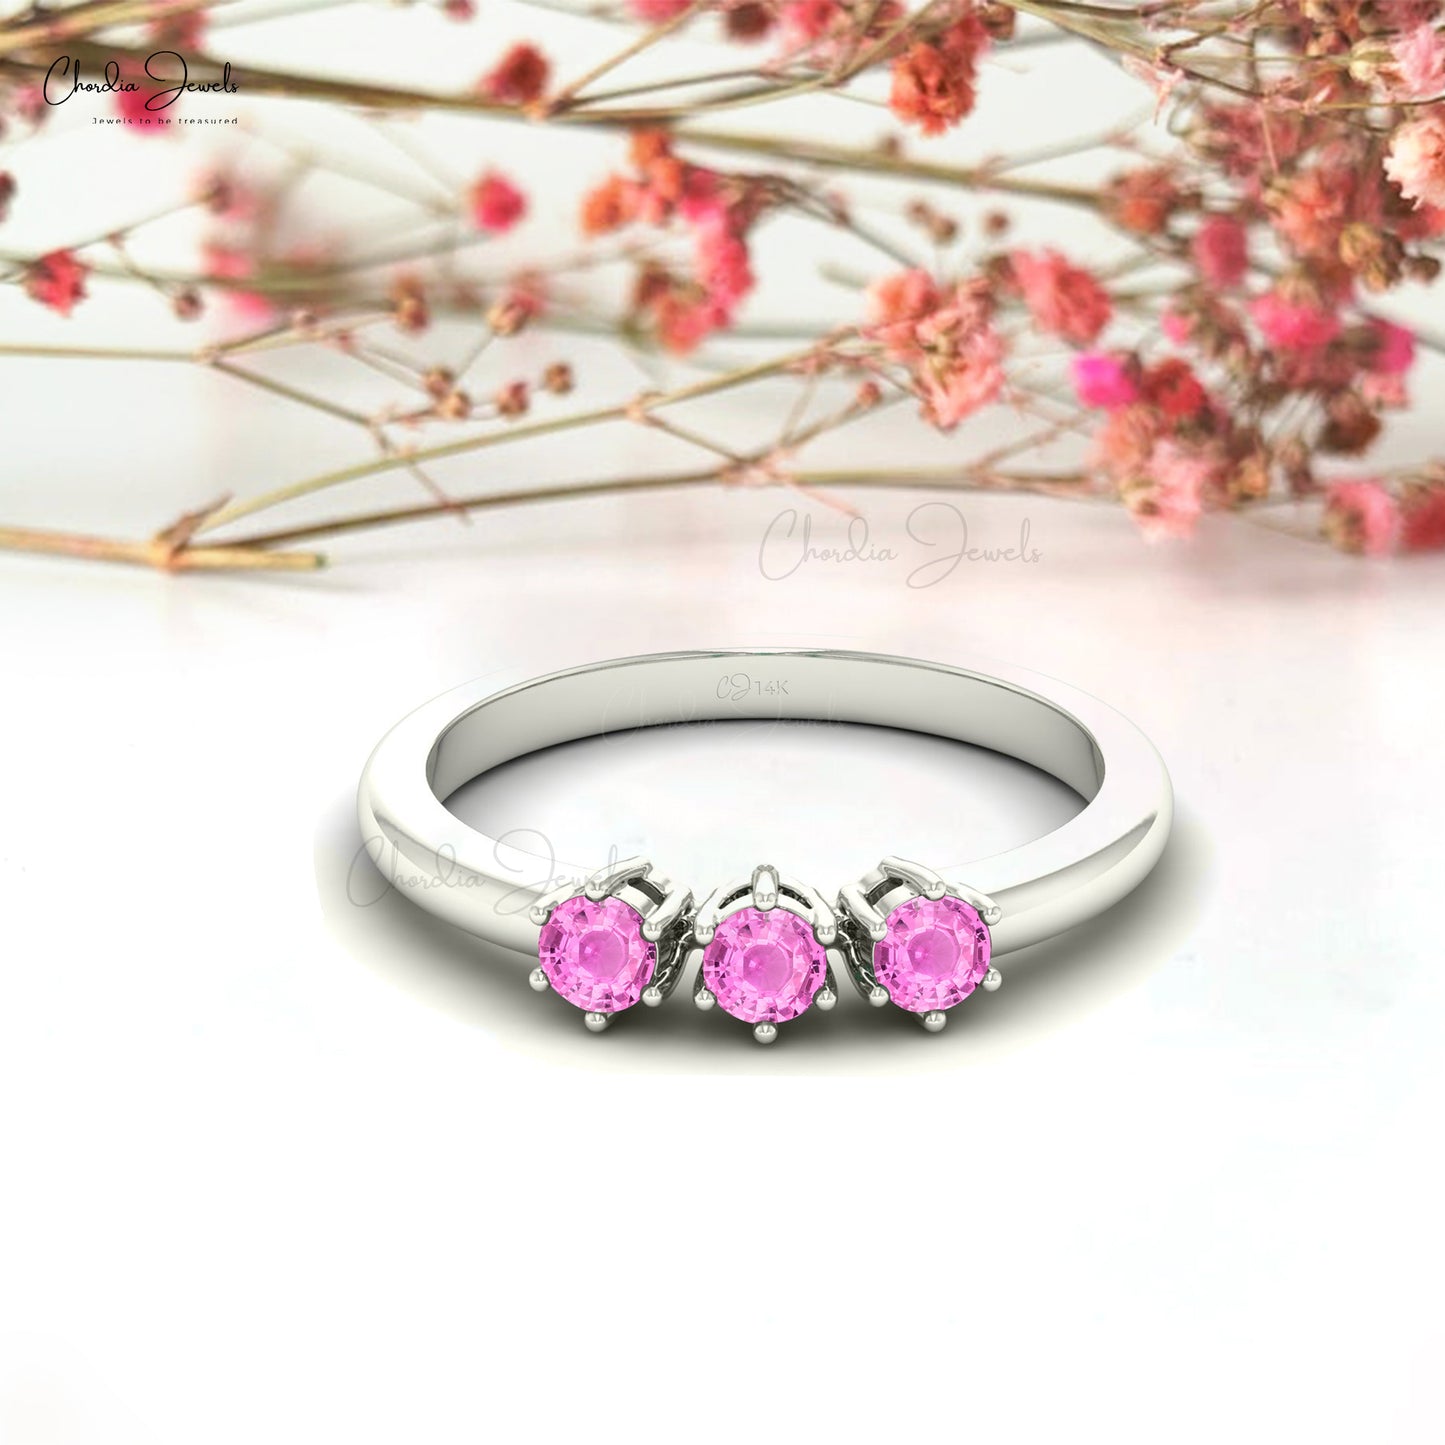 AAA Pink Sapphire Trilogy Ring 3mm Brilliant Round Cut Gemstone Ring Genuine 14k Real Gold Handmade Jewelry For Wedding Gift